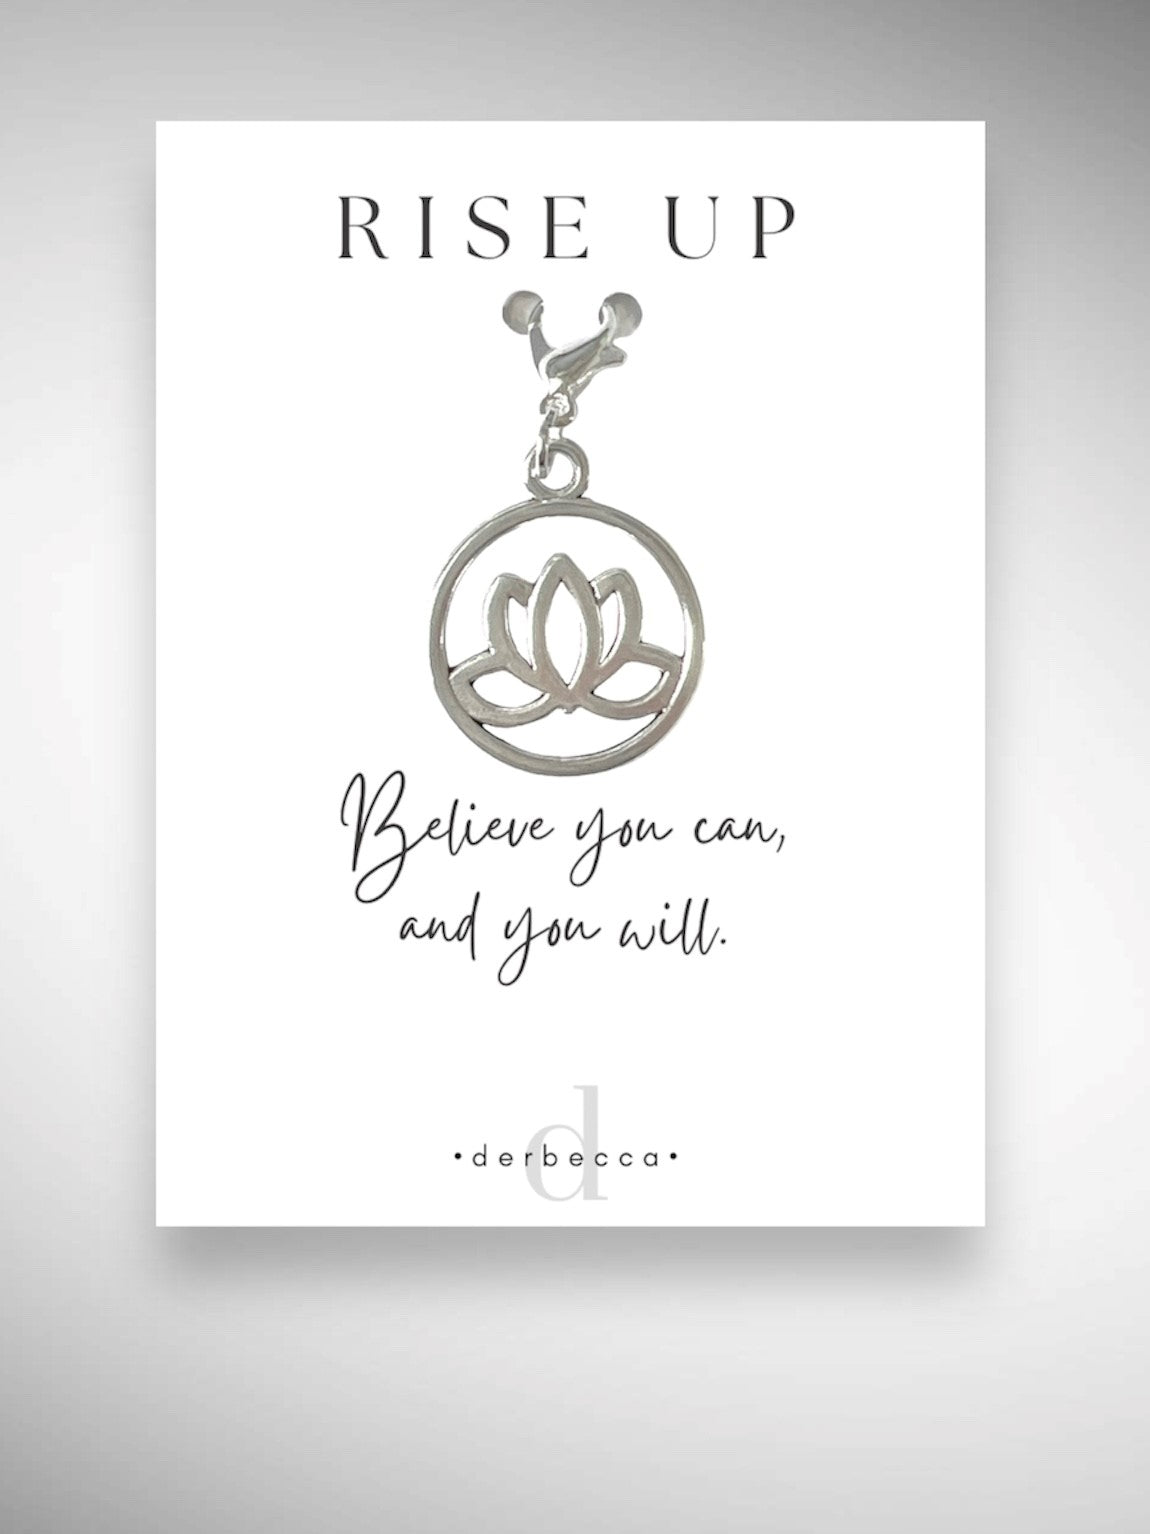 Lotus Flower Charm Jewelry Pendant Zipper Pull Clip-On Charm Clip Accessory Lobster Claw Clasp with Poem Verse Inspirational Saying Card: RISE UP Believe you can, and you will.